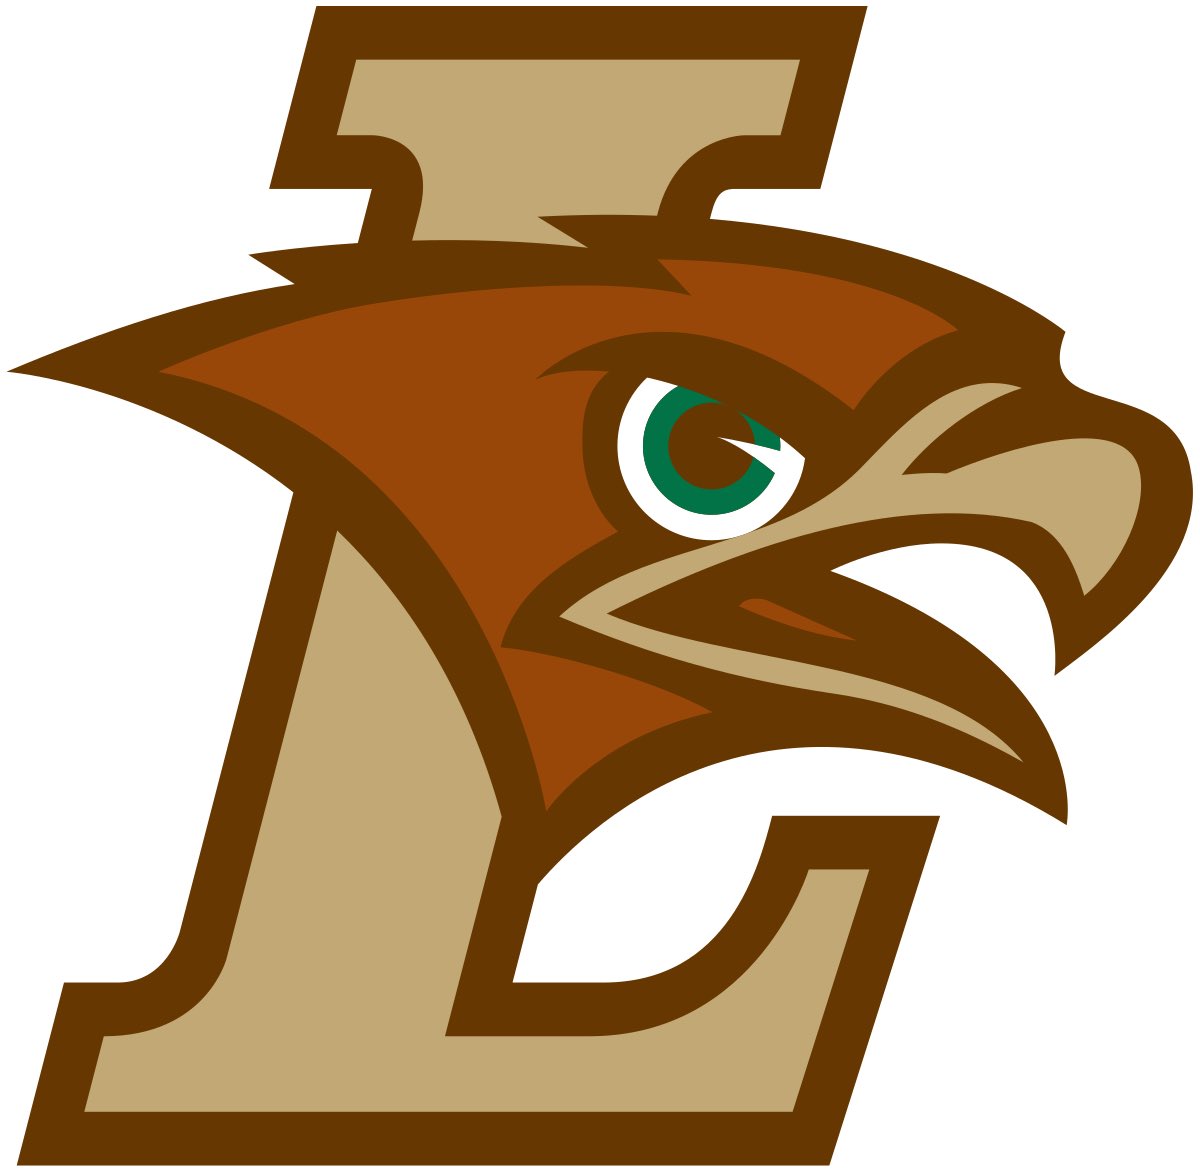 I am blessed to have received an offer to play division one football at the university of Lehigh. Thank you to @CoachDanHunt and @coach_cahill for the amazing visit!!! @canes77